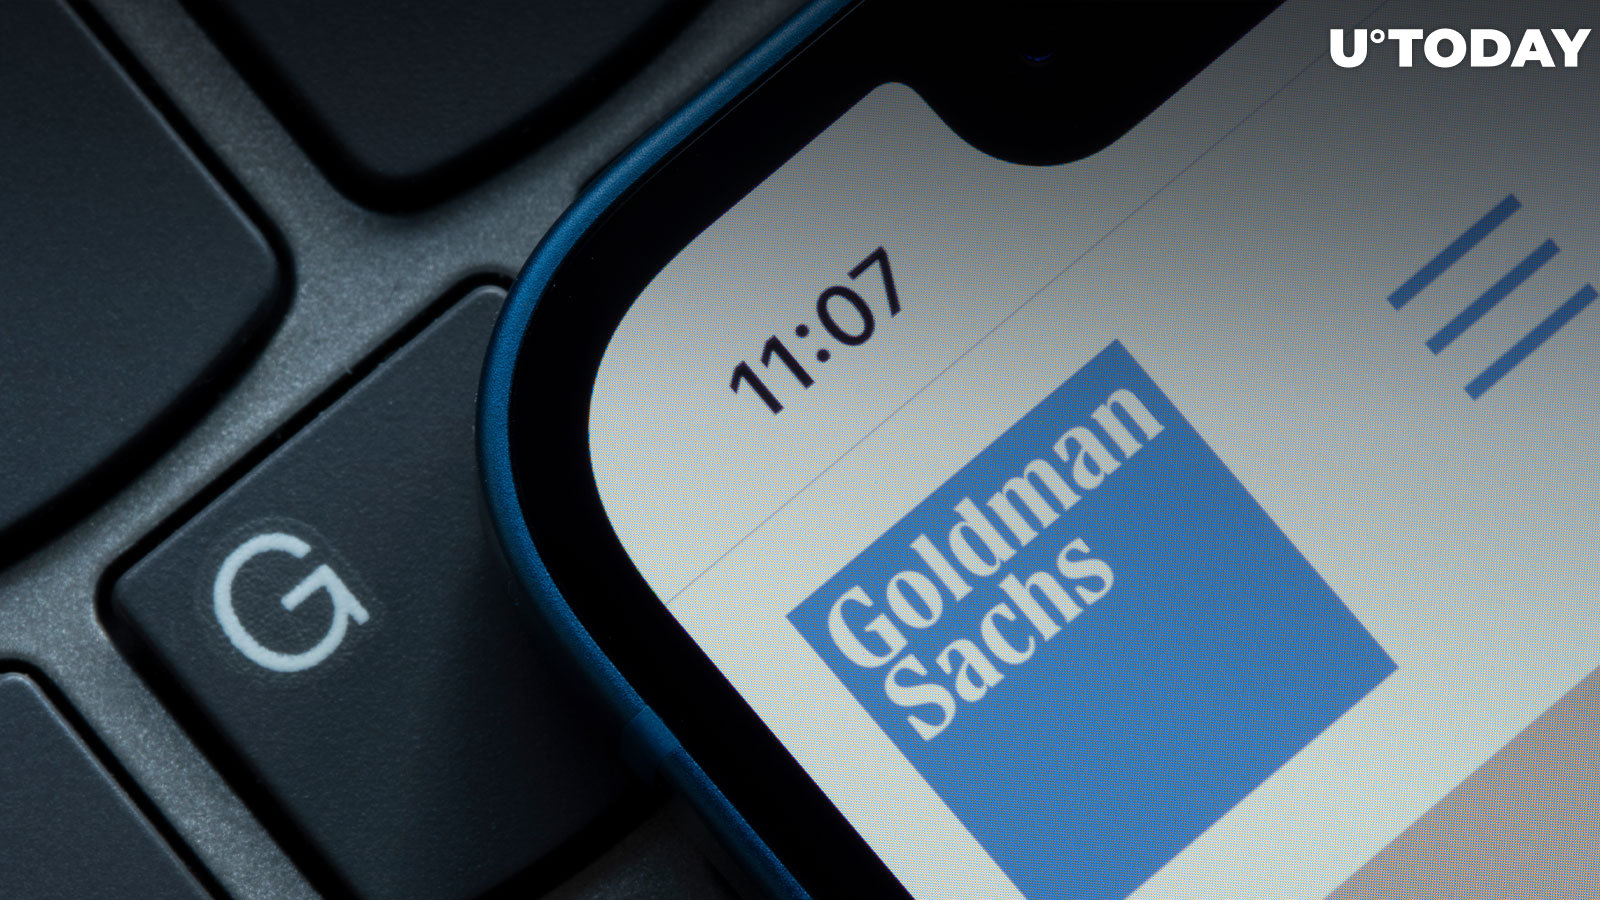 Goldman Sachs Classifies XRP, Shiba Inu and Other Cryptocurrencies